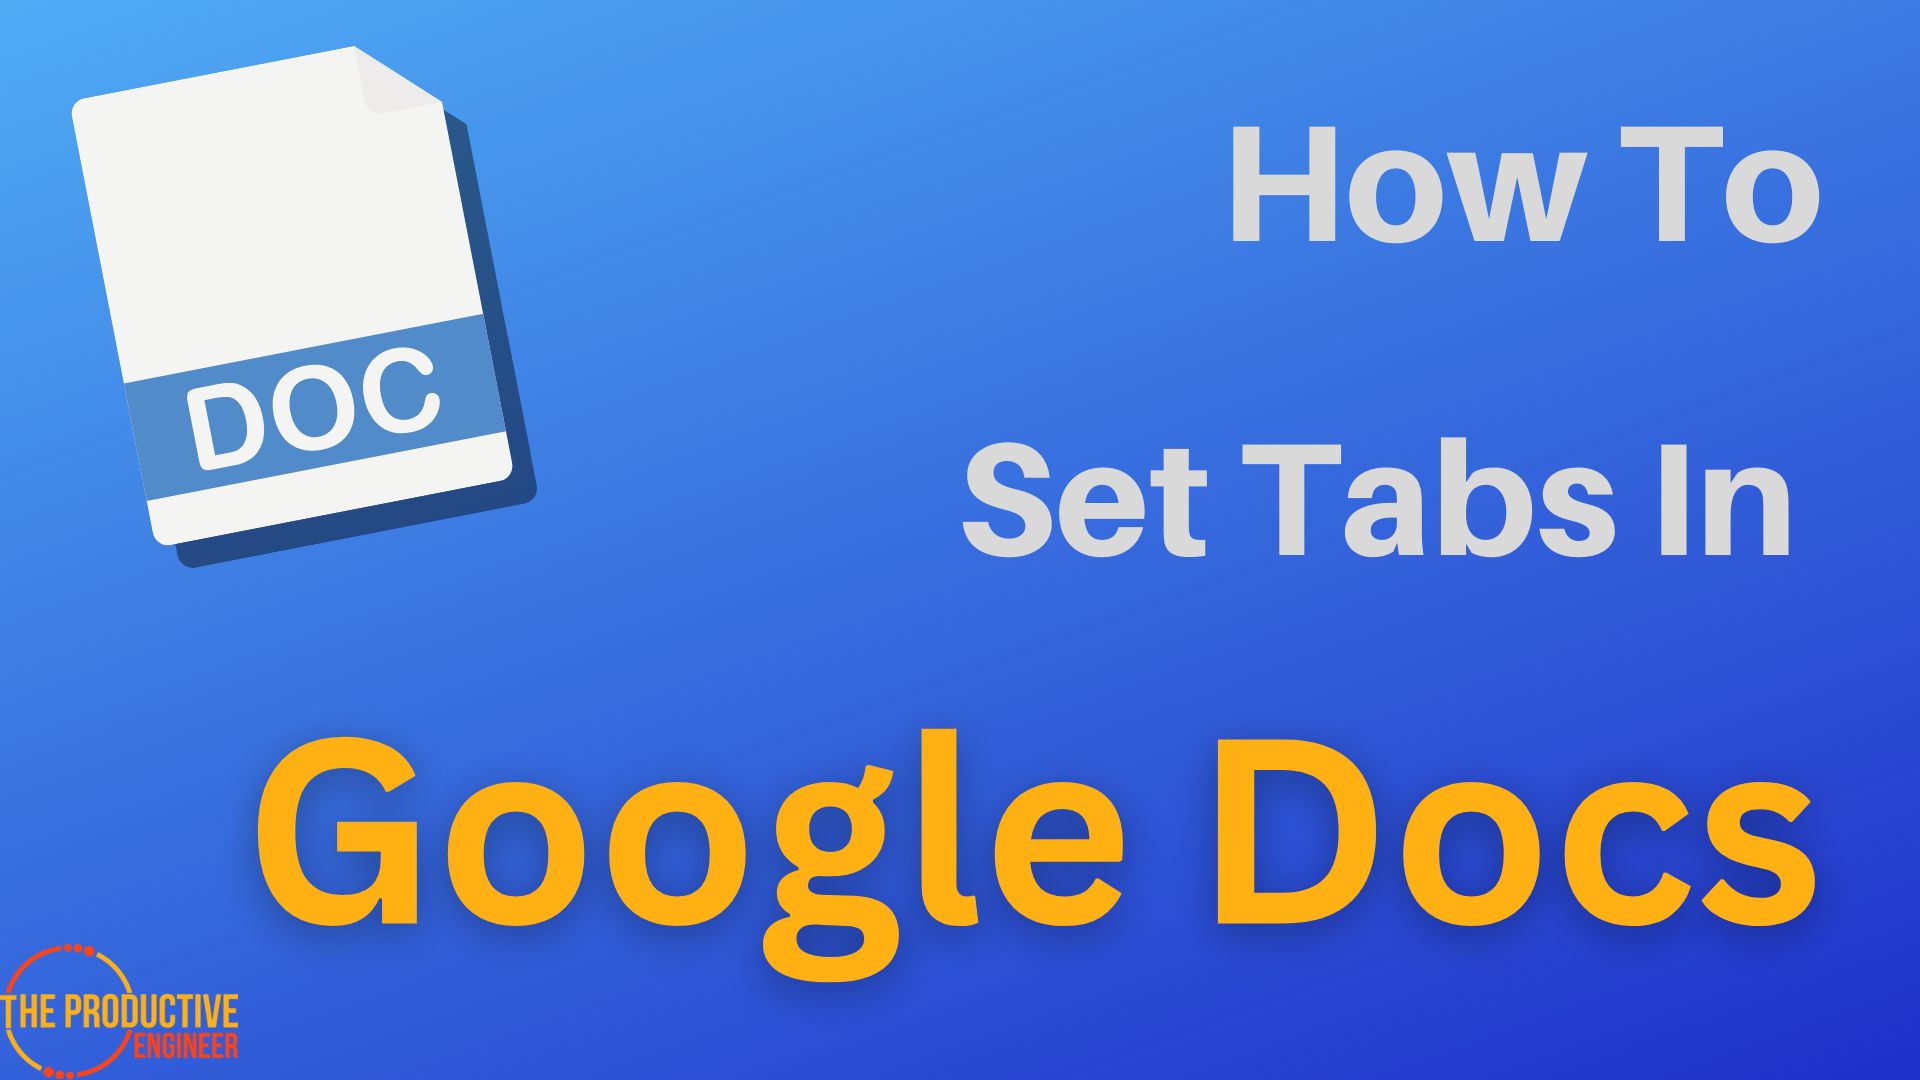 How To Set Tabs In Google Docs